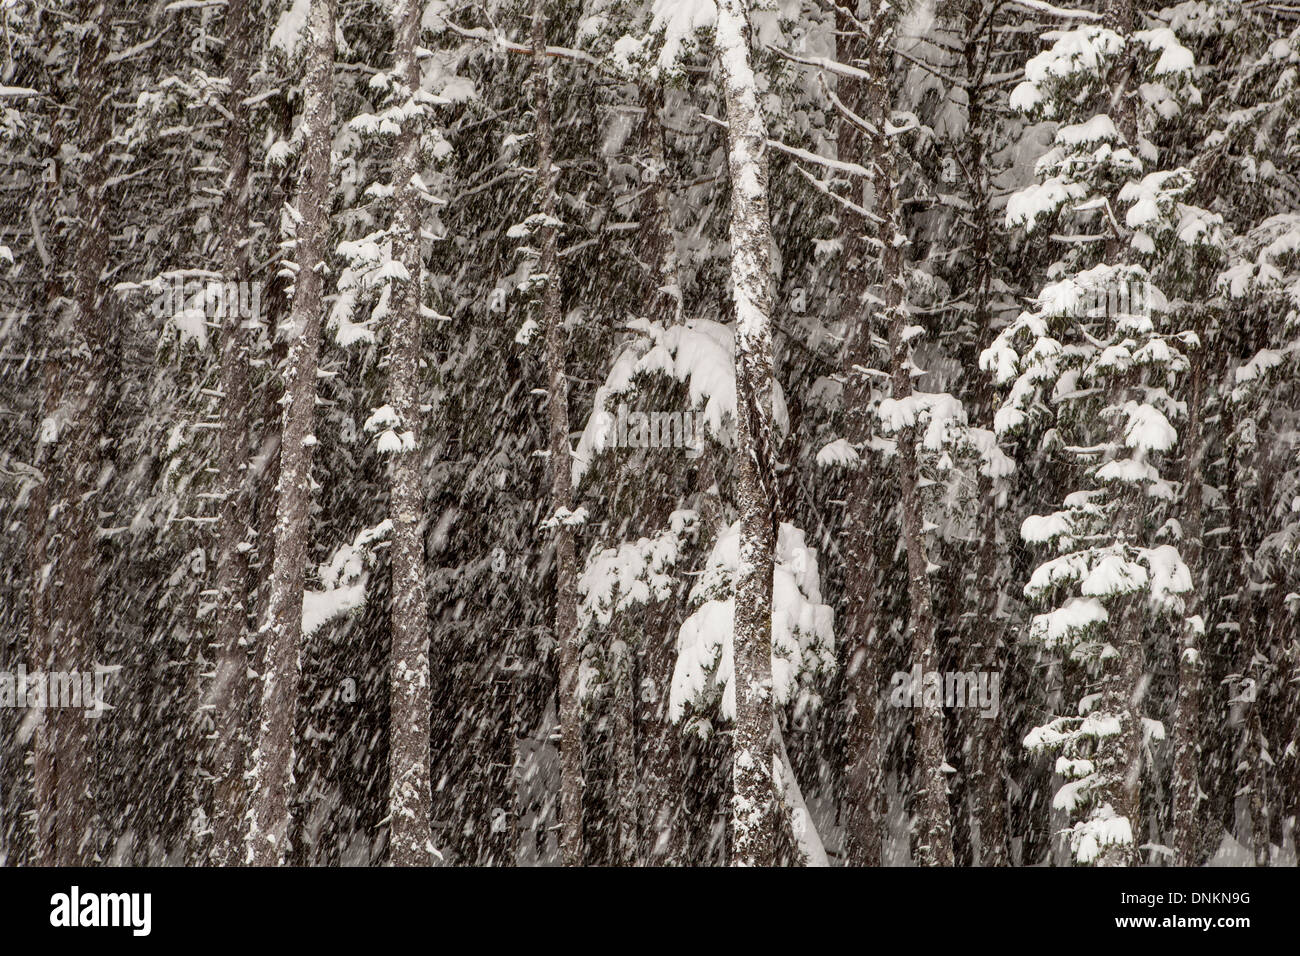 Winter snow falling in an Alaskan forest with hemlock trees and spruce. Stock Photo